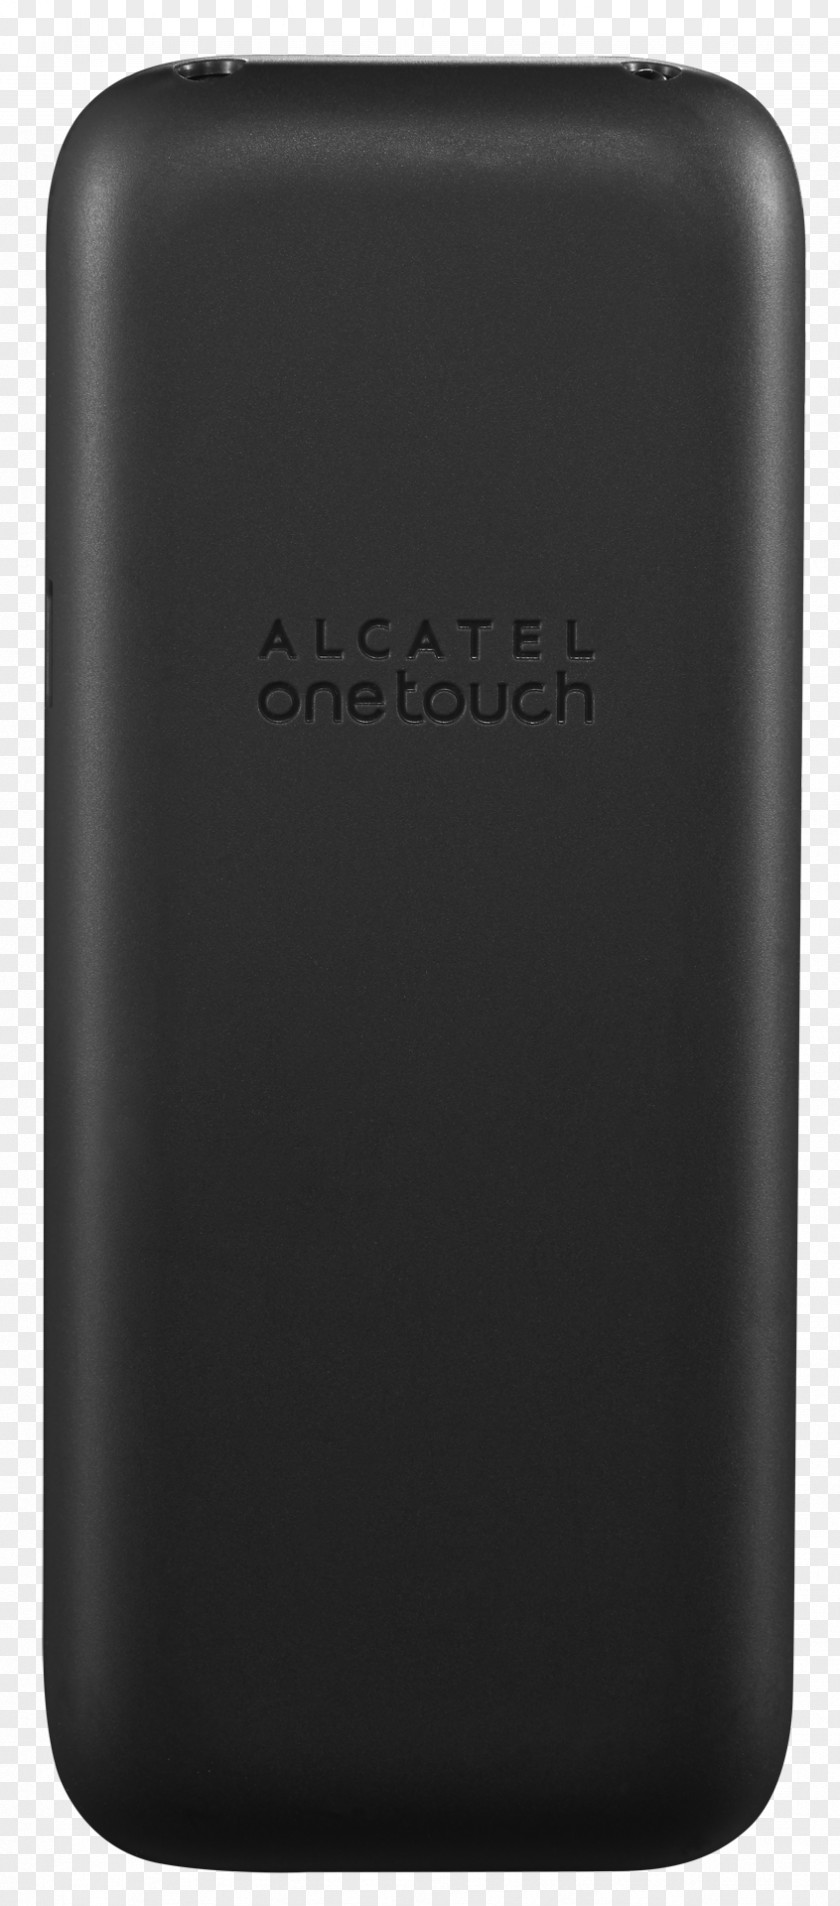 Gsm Alcatel One Touch Apple TV (4th Generation) Product Manuals 4K ITunes PNG